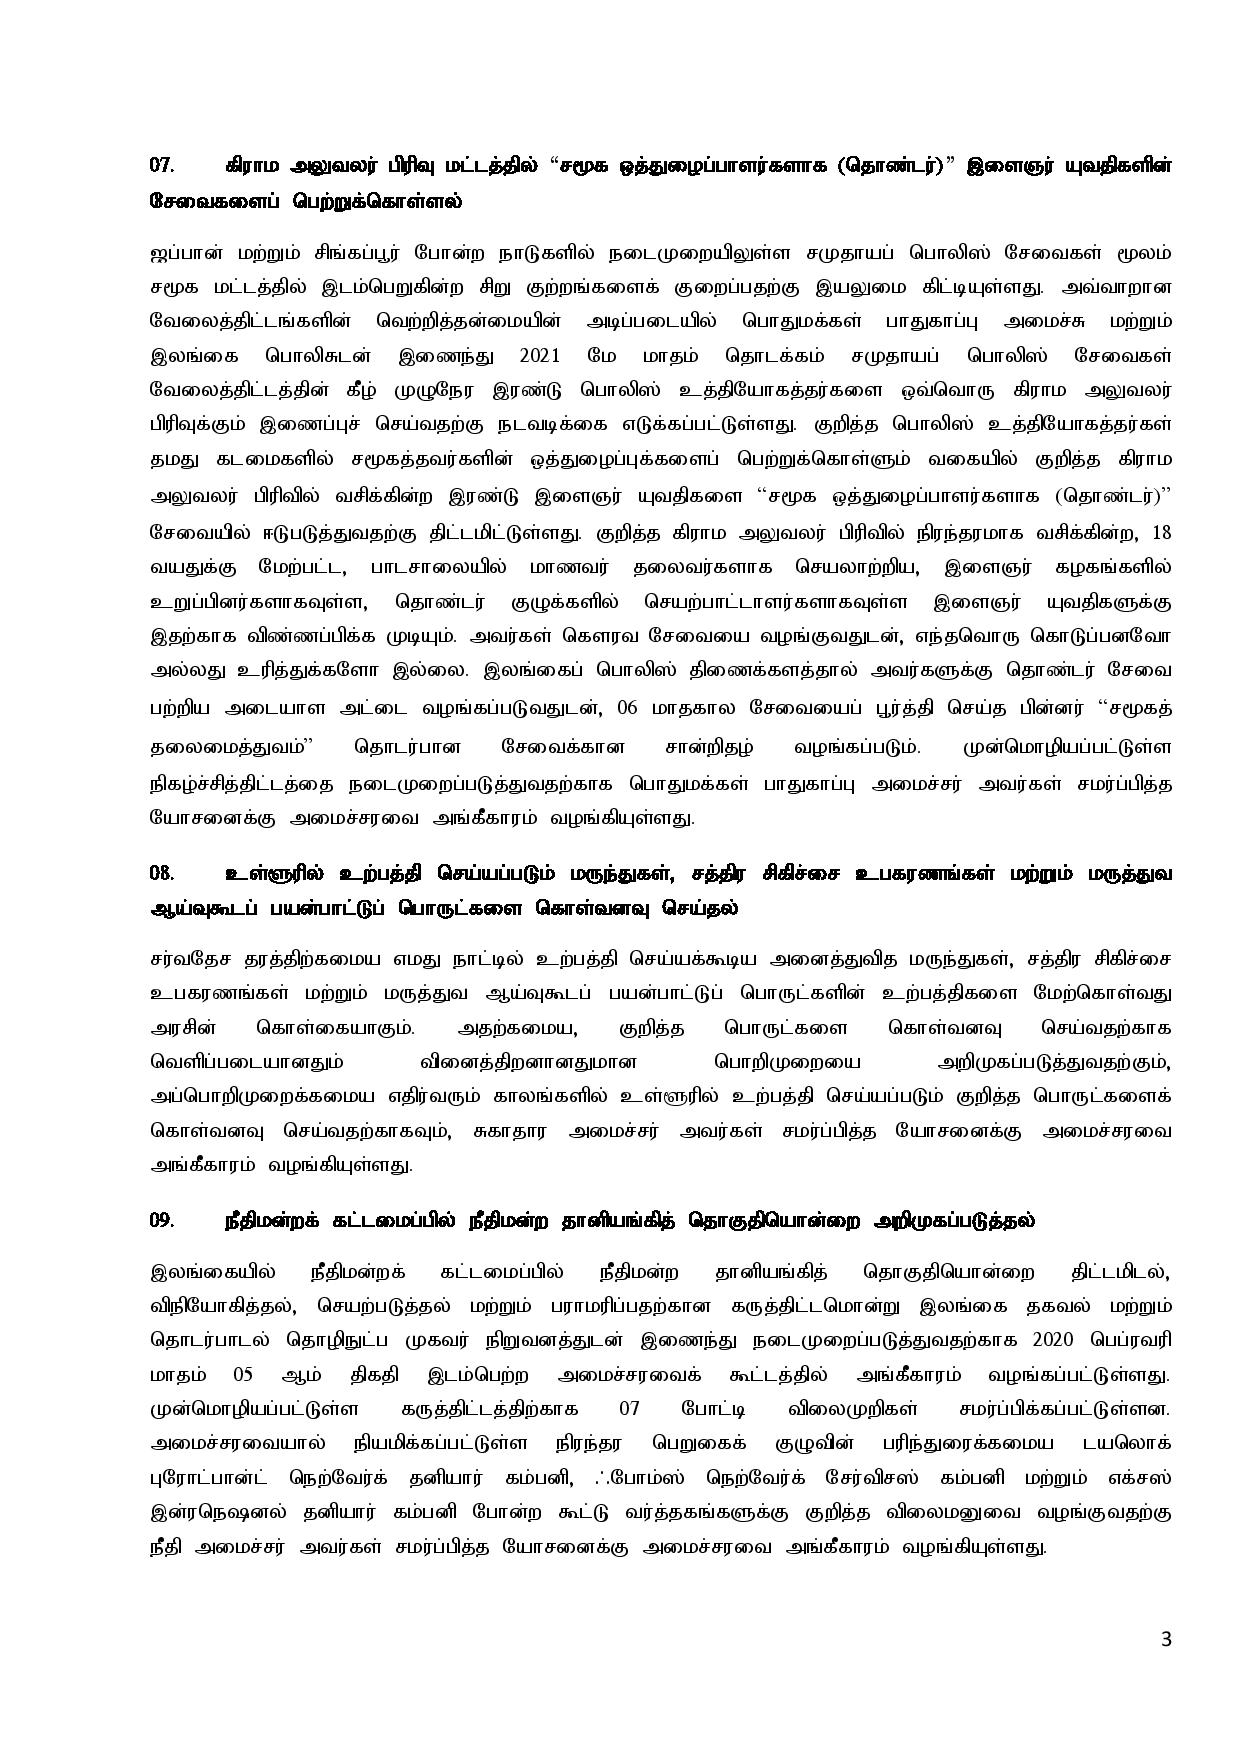 Cabinet Decisions on 21.02.2022 Tamil page 003